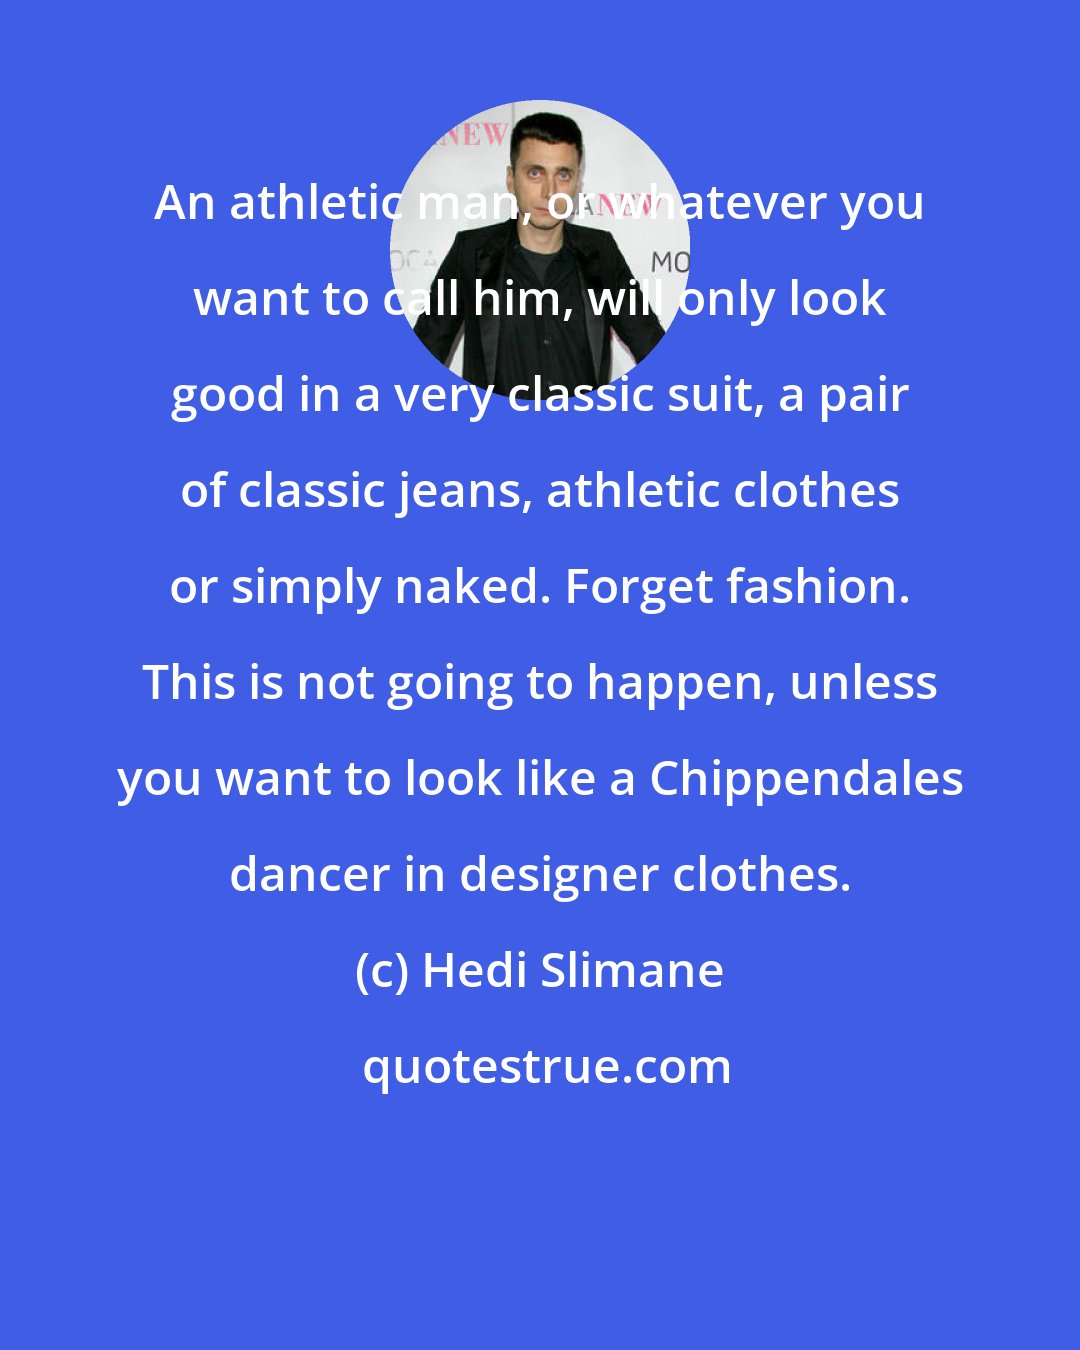 Hedi Slimane: An athletic man, or whatever you want to call him, will only look good in a very classic suit, a pair of classic jeans, athletic clothes or simply naked. Forget fashion. This is not going to happen, unless you want to look like a Chippendales dancer in designer clothes.